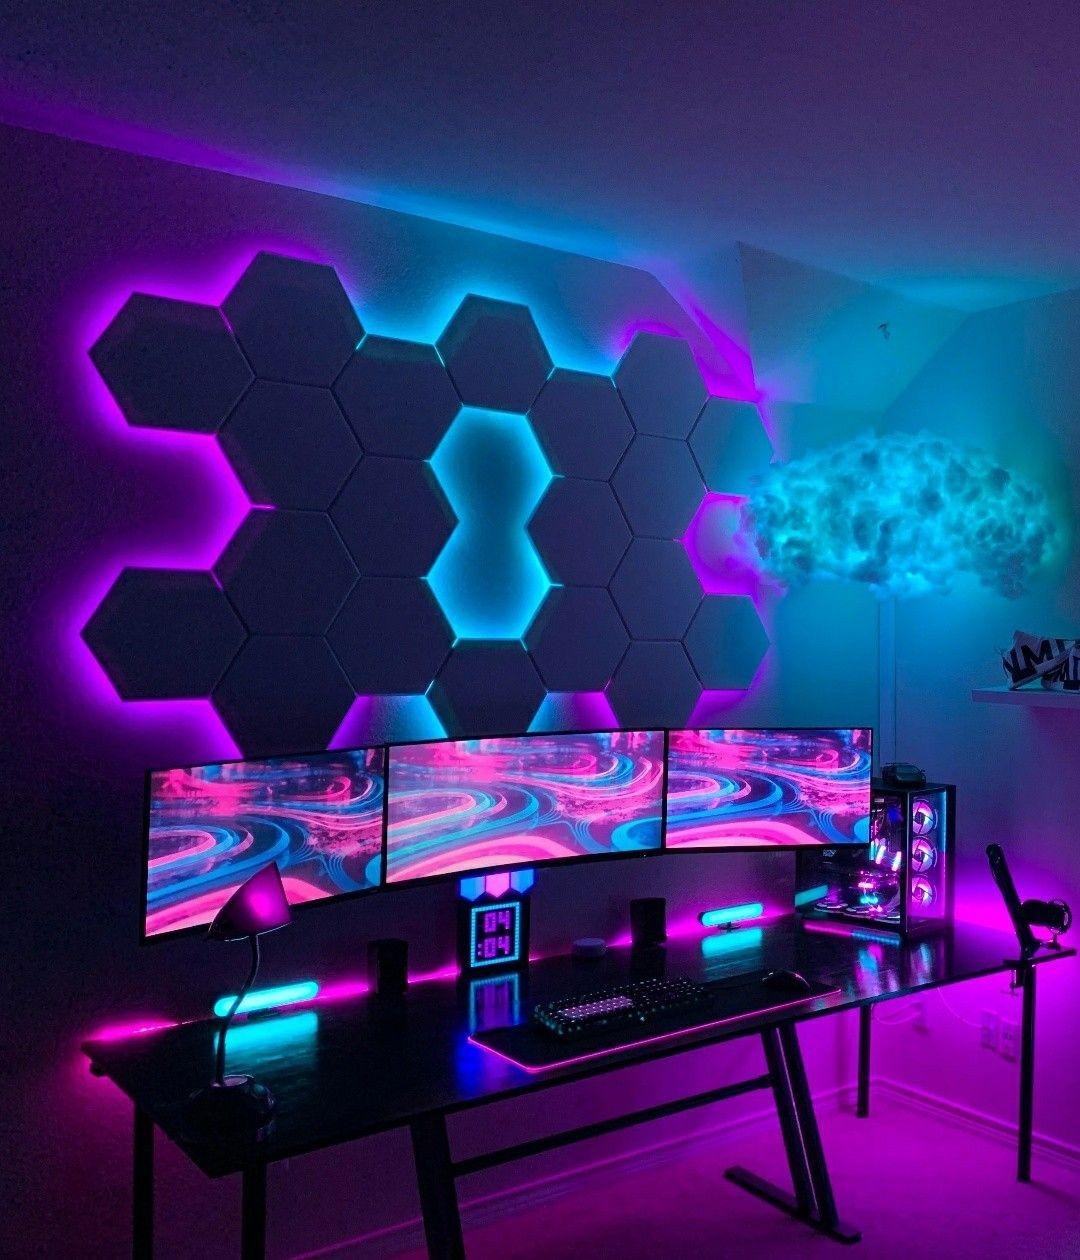 Gaming Room Design 6 Ideas for Your Home